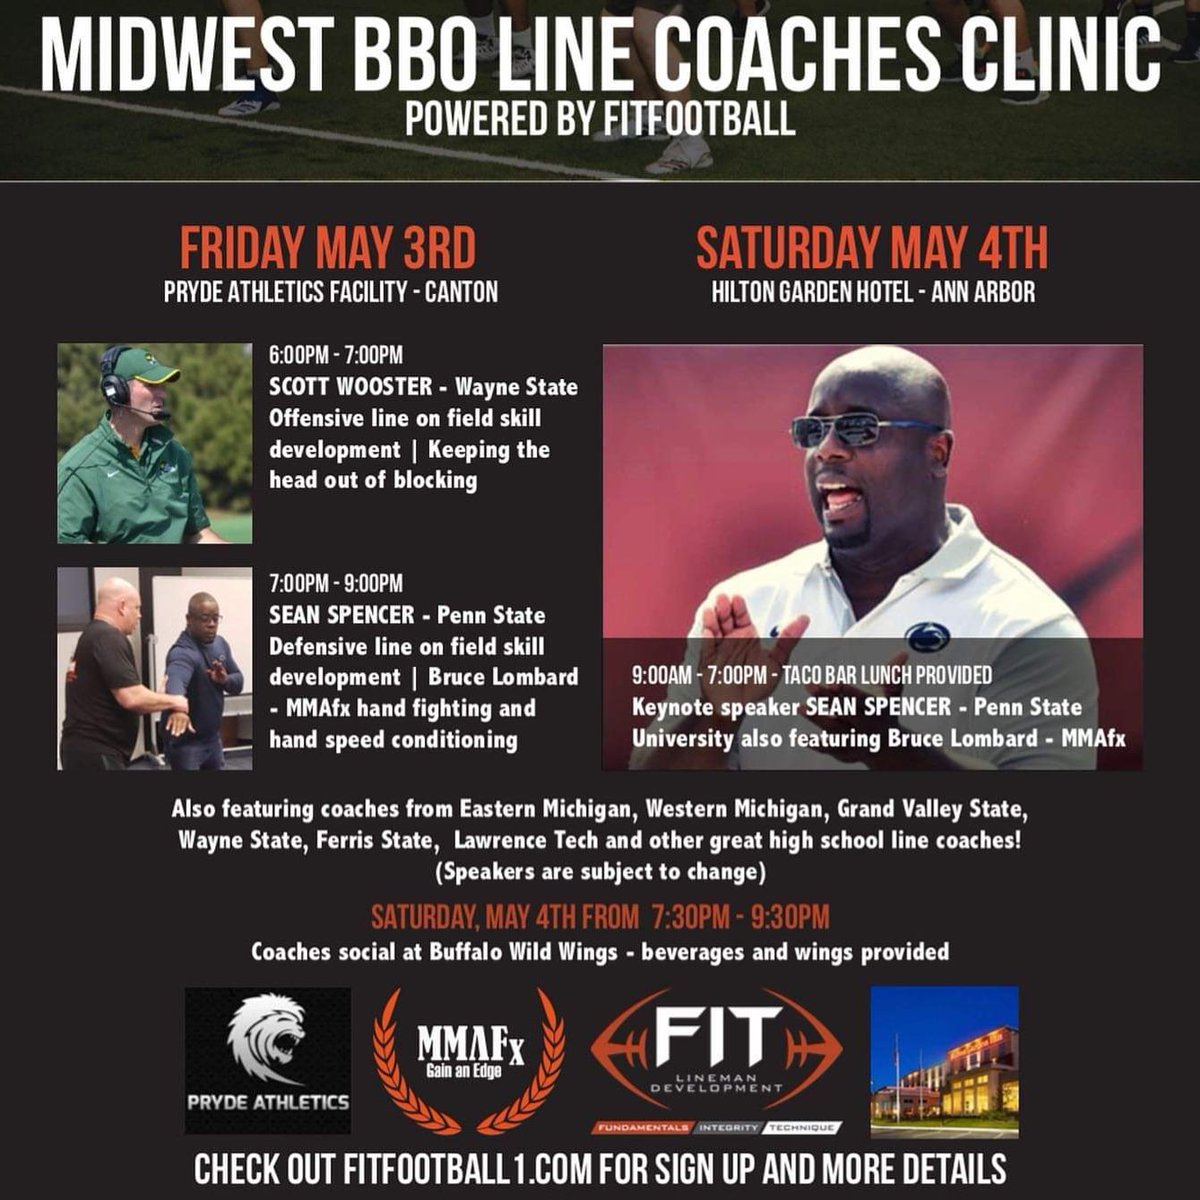 MMAFx enjoyed a great wknd at the inaugural Midwest DLine & OLine Football Coaches Clinic. Impressive energy & knowledge shared by many great Coaches. Can't wait to see what @FITfootballLLC can do to top this in the coming years! #football #footballclinic #coaches #dline #oline